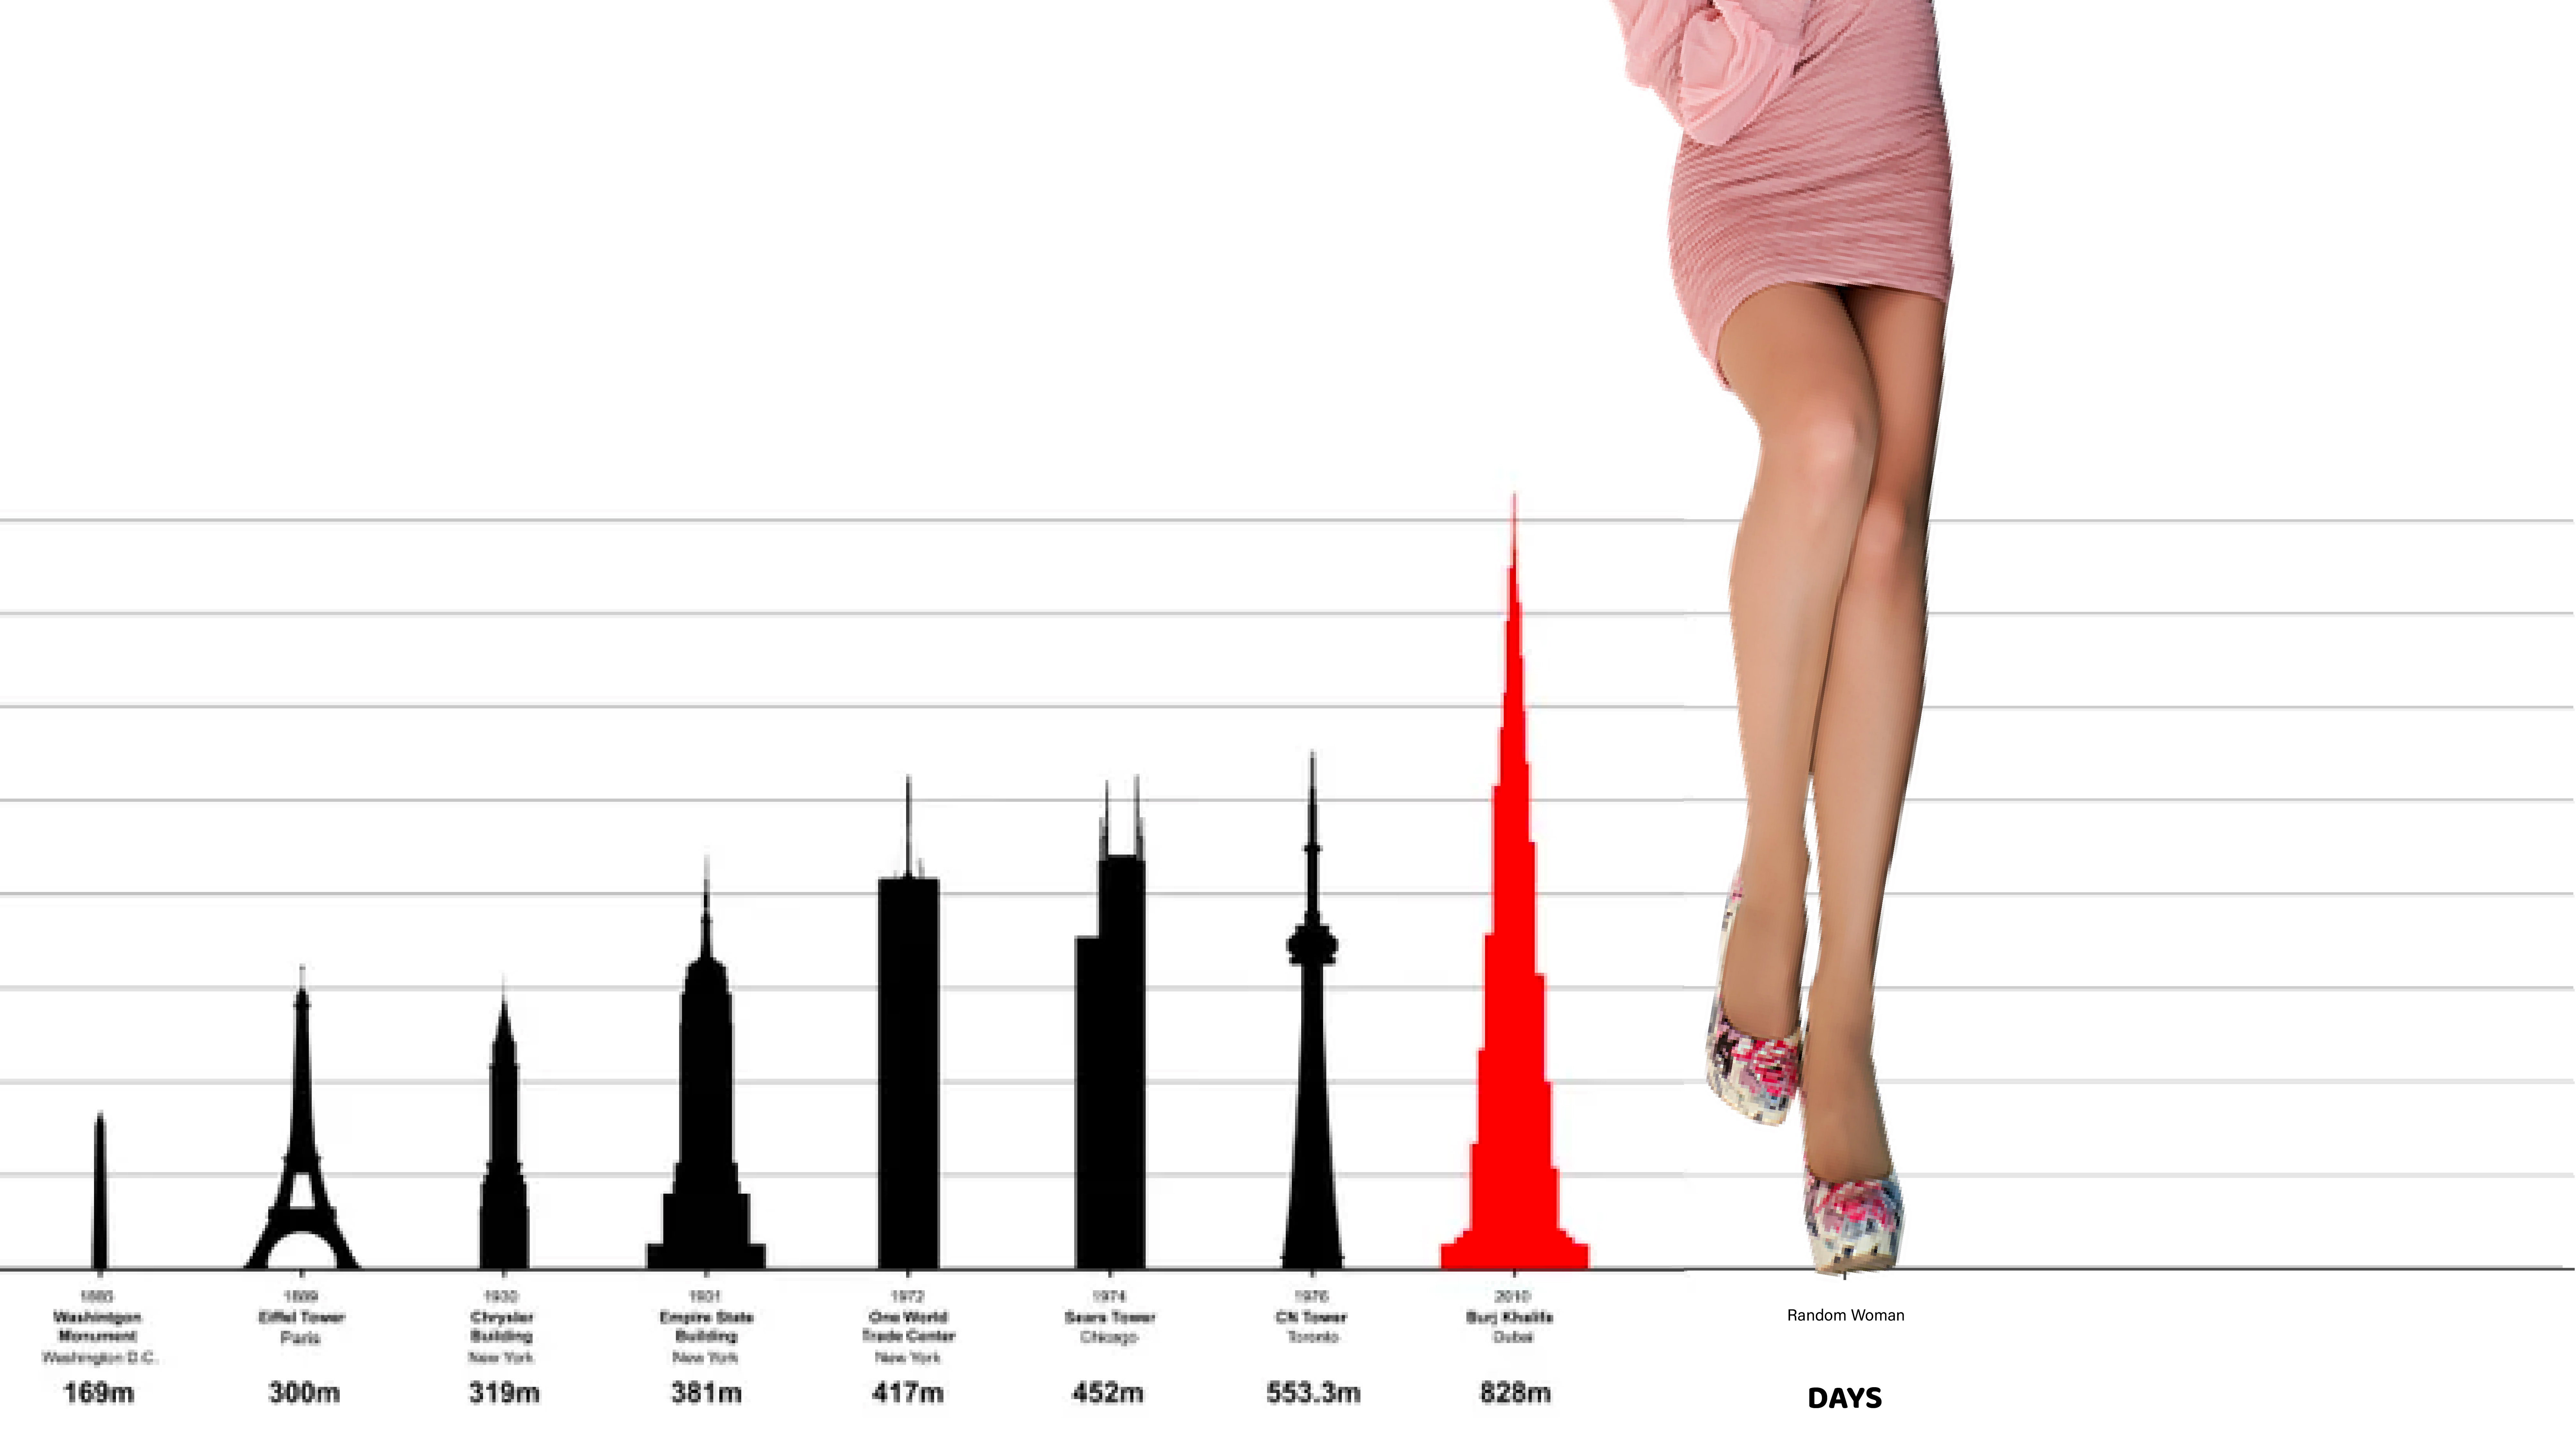 tallest woman in the world 2010